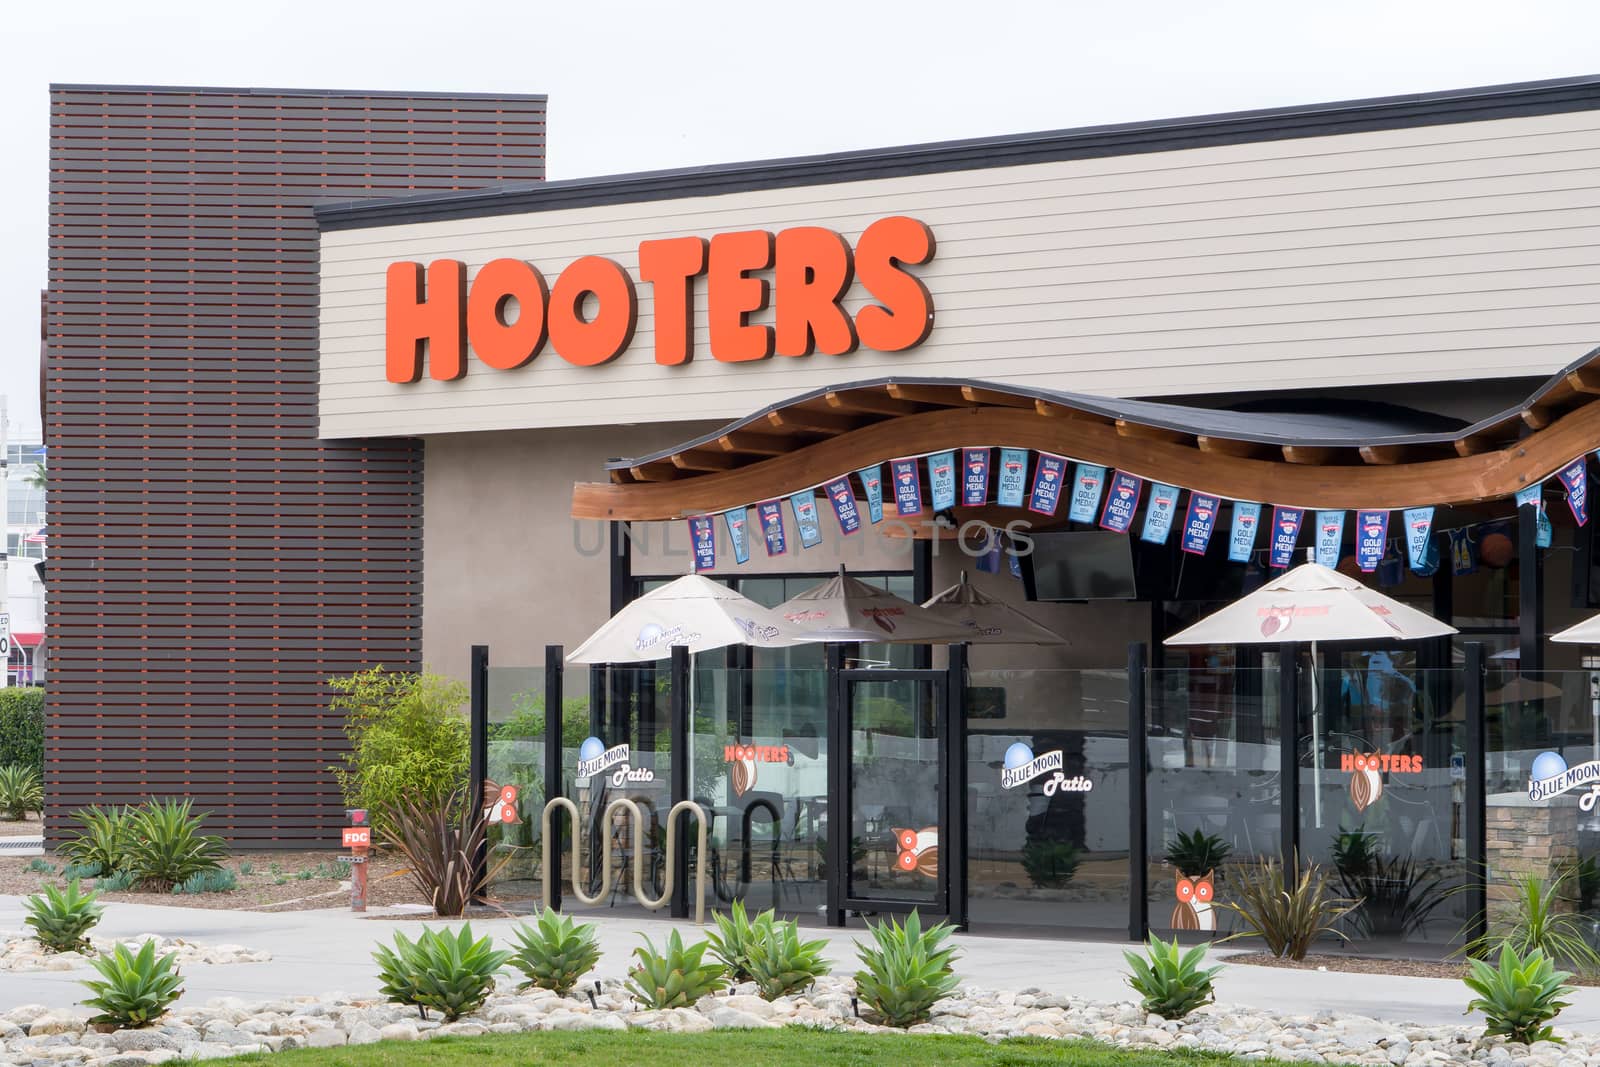 Hooters Restaurant Exterior and Logo by wolterk